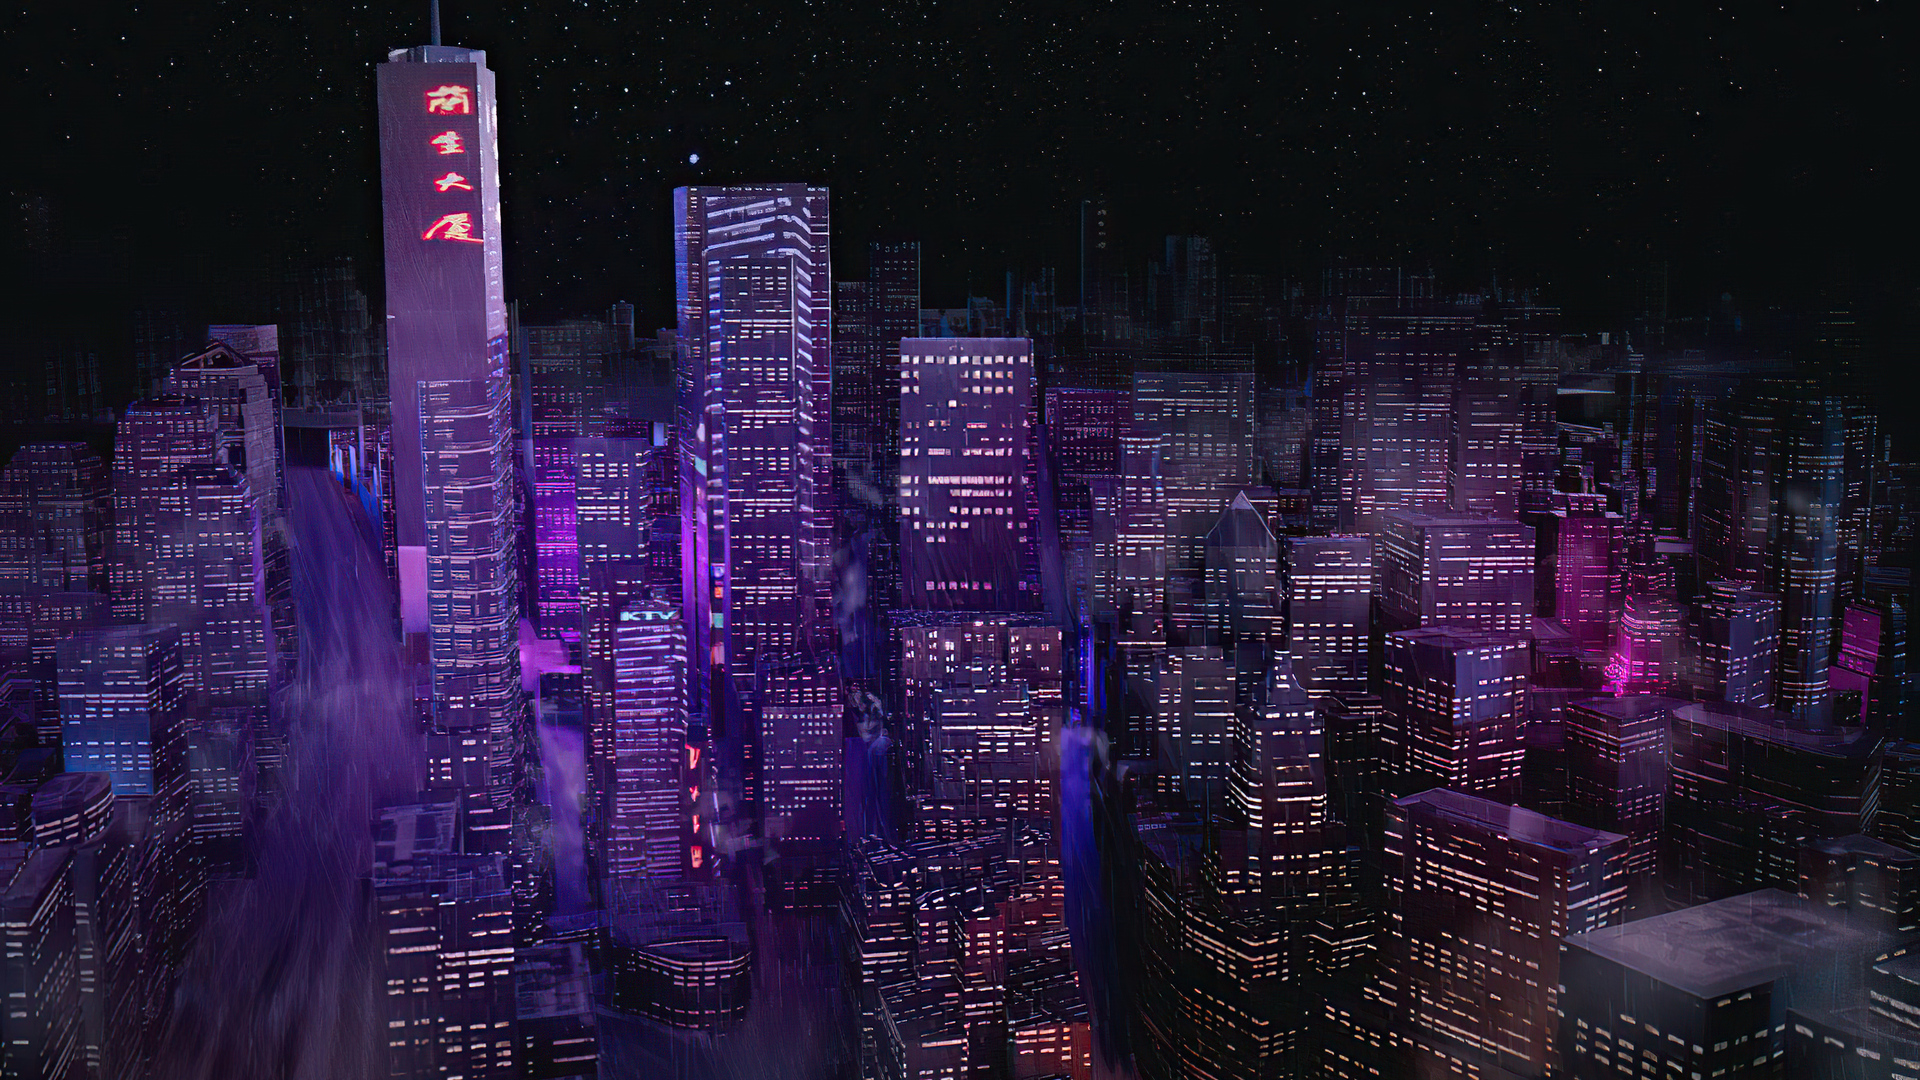 Background images, City wallpaper, Night city